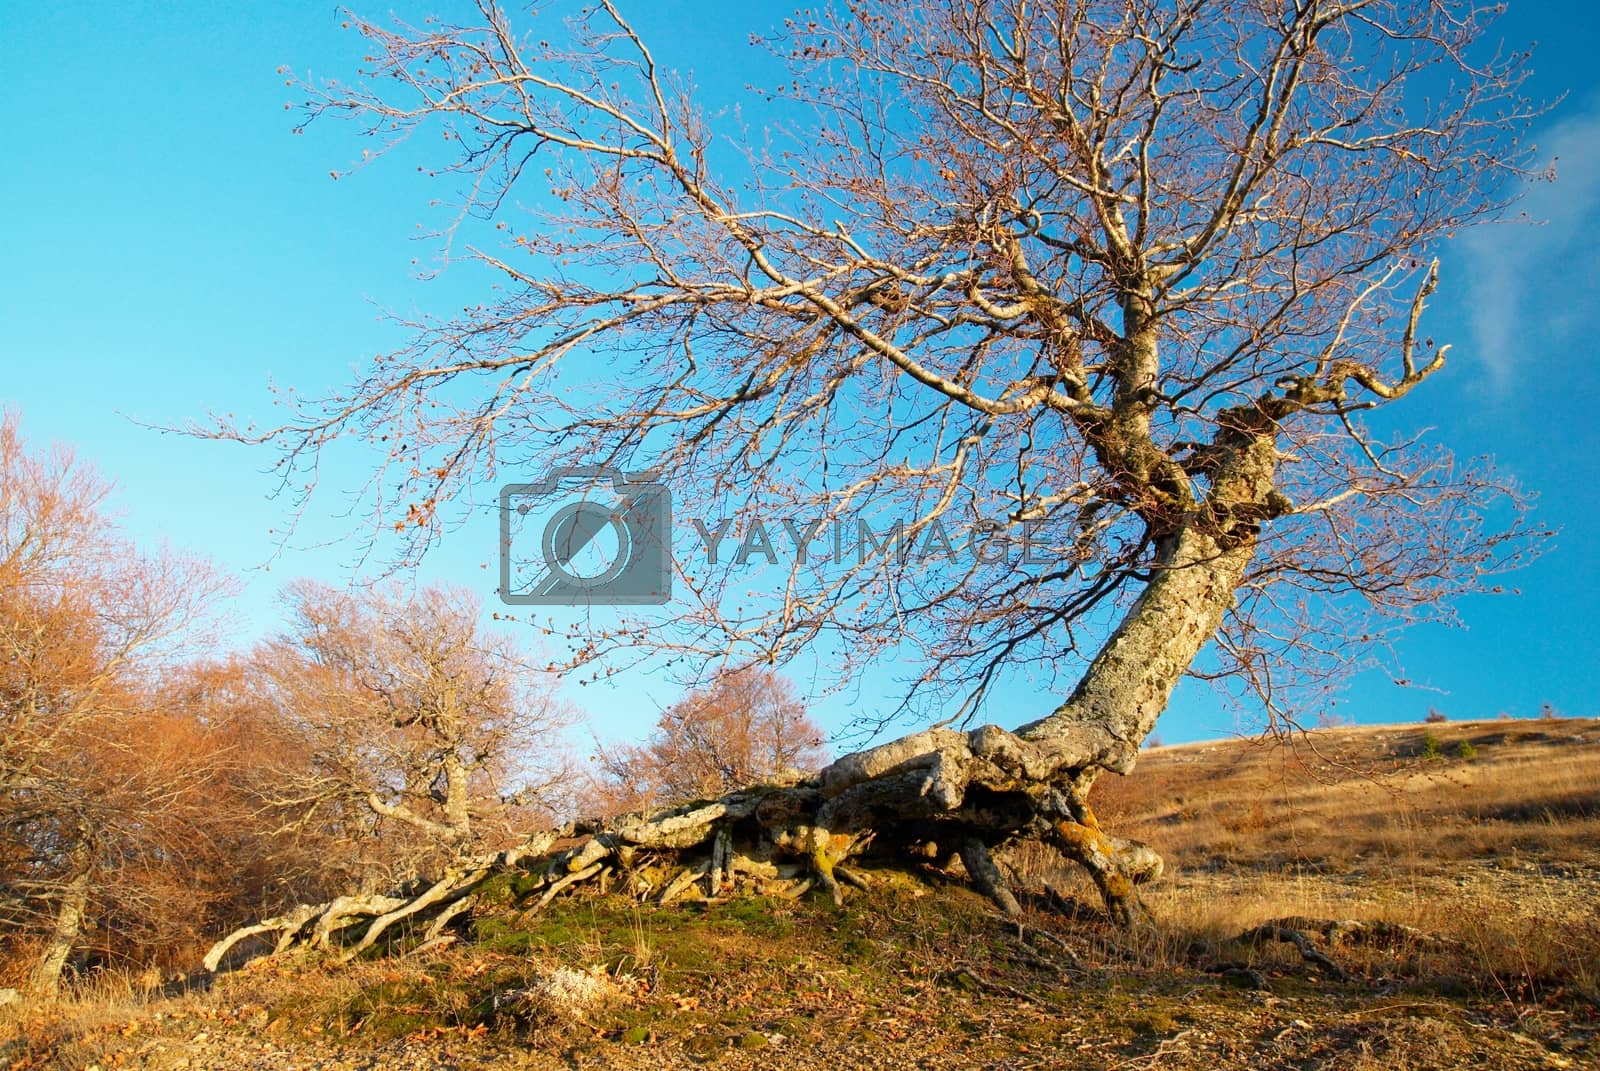 Royalty free image of Landscape with tree and blue sky. by vapi